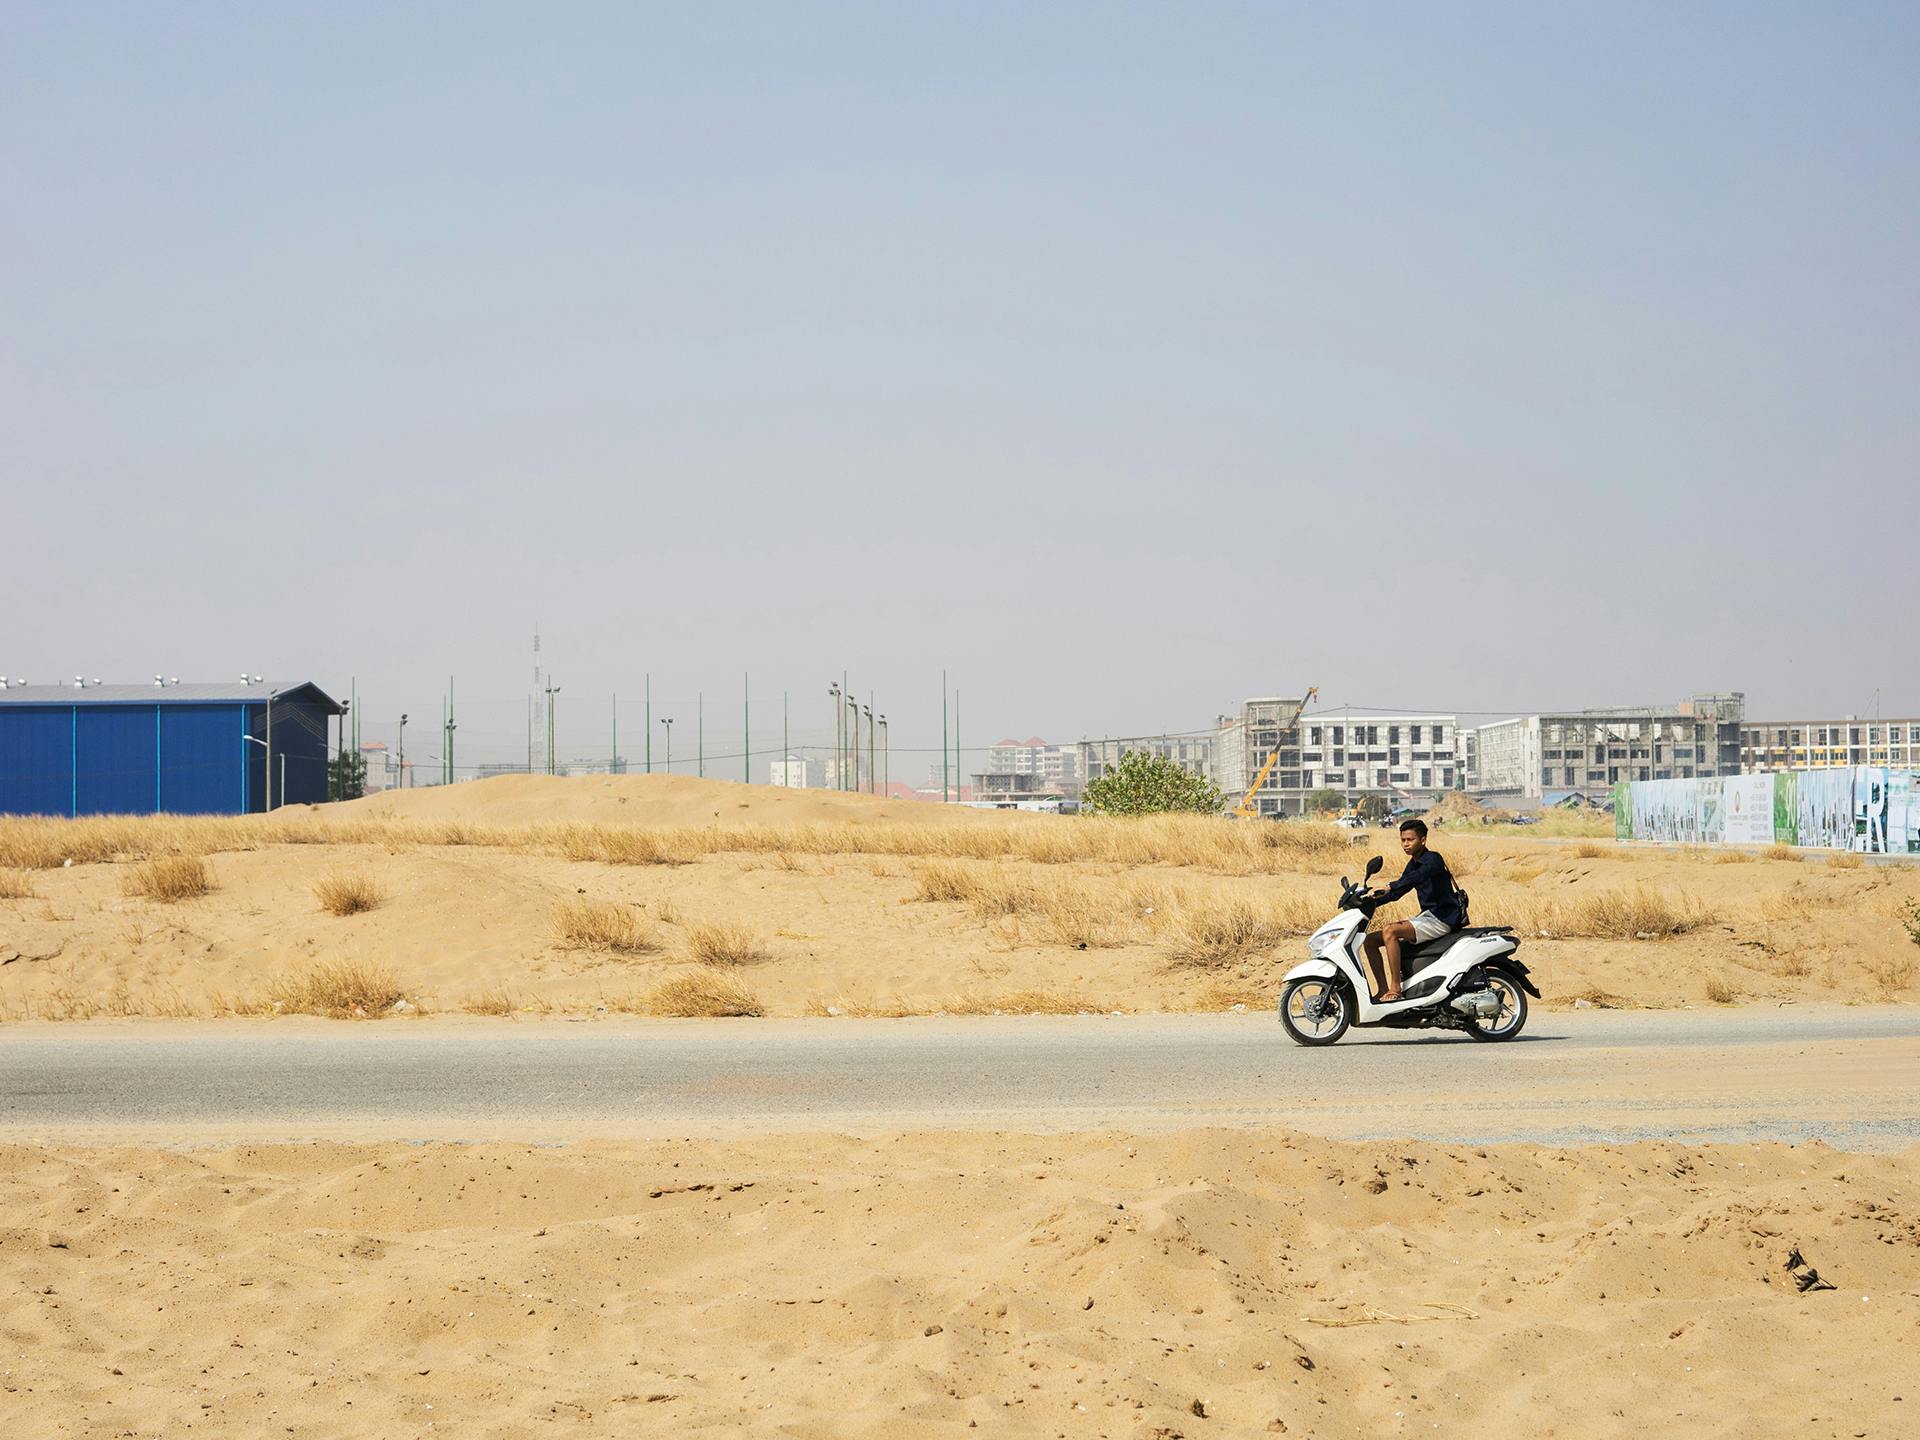 A man on a motorcycle dricing through a wide landscape.